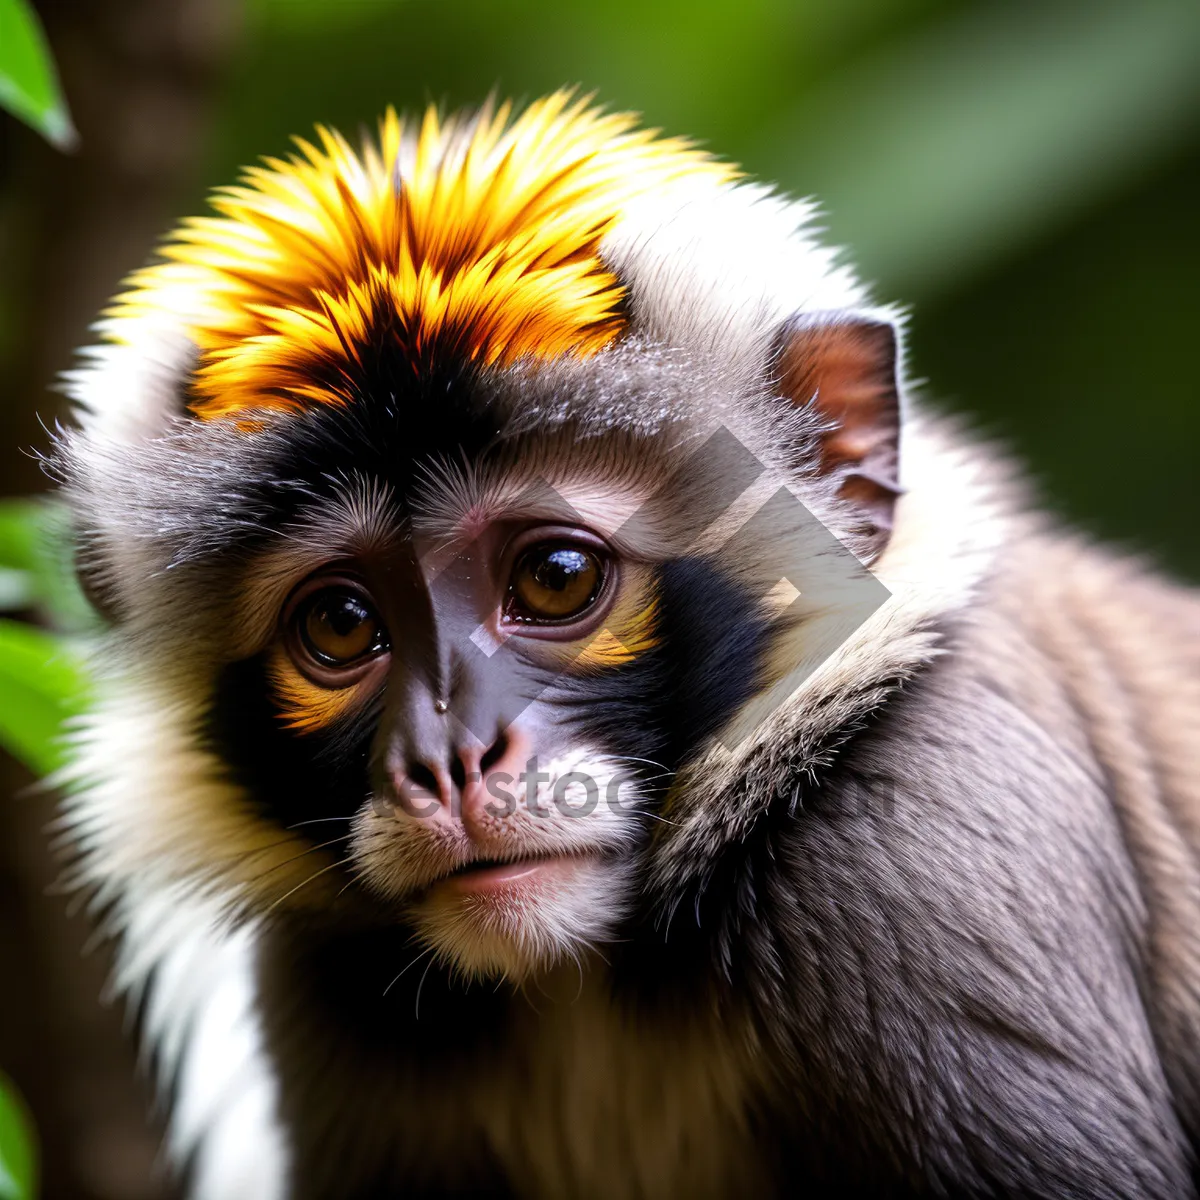 Picture of Wild Macaque Monkey Portrait at the Zoo